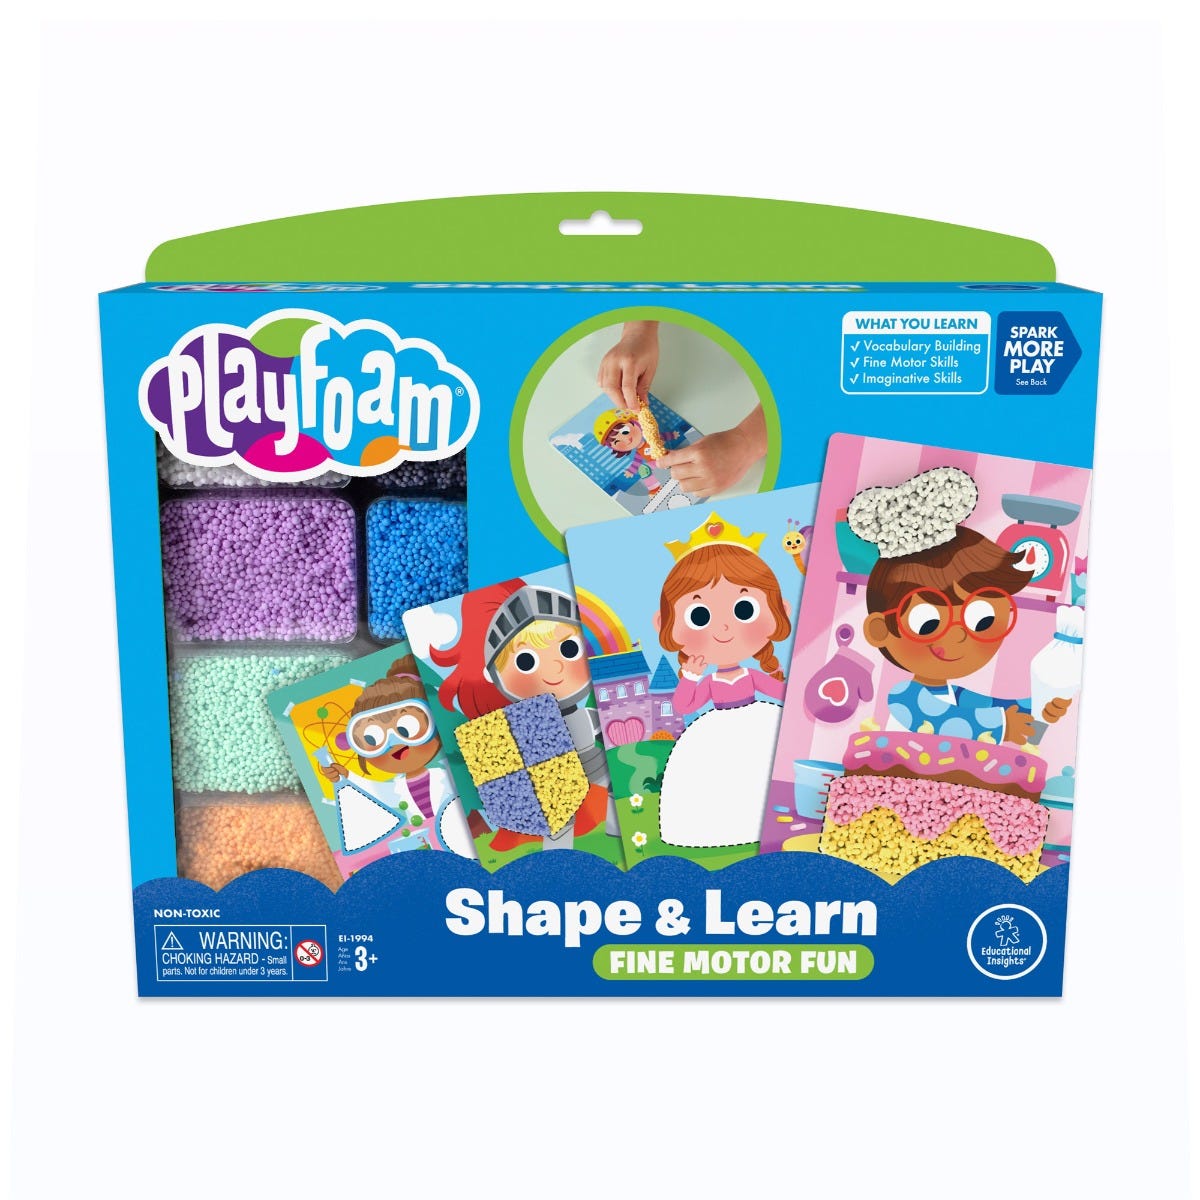 Playfoam® Shape & Learn Fine Motor Fun, As children use squishy, squashy Playfoam to fill in the colourful character cards included in this creative play activity set, they build fine motor skills through fun play. Children can add 3D clothing, accessories, and other props to the colouring book style pictures. They can also sculpt Playfoam into their own custom creations. Best of all is Playfoam never dries out, so the creative shaping fun never ends! Includes 8 bricks of Playfoam and 13 reusable, double-si